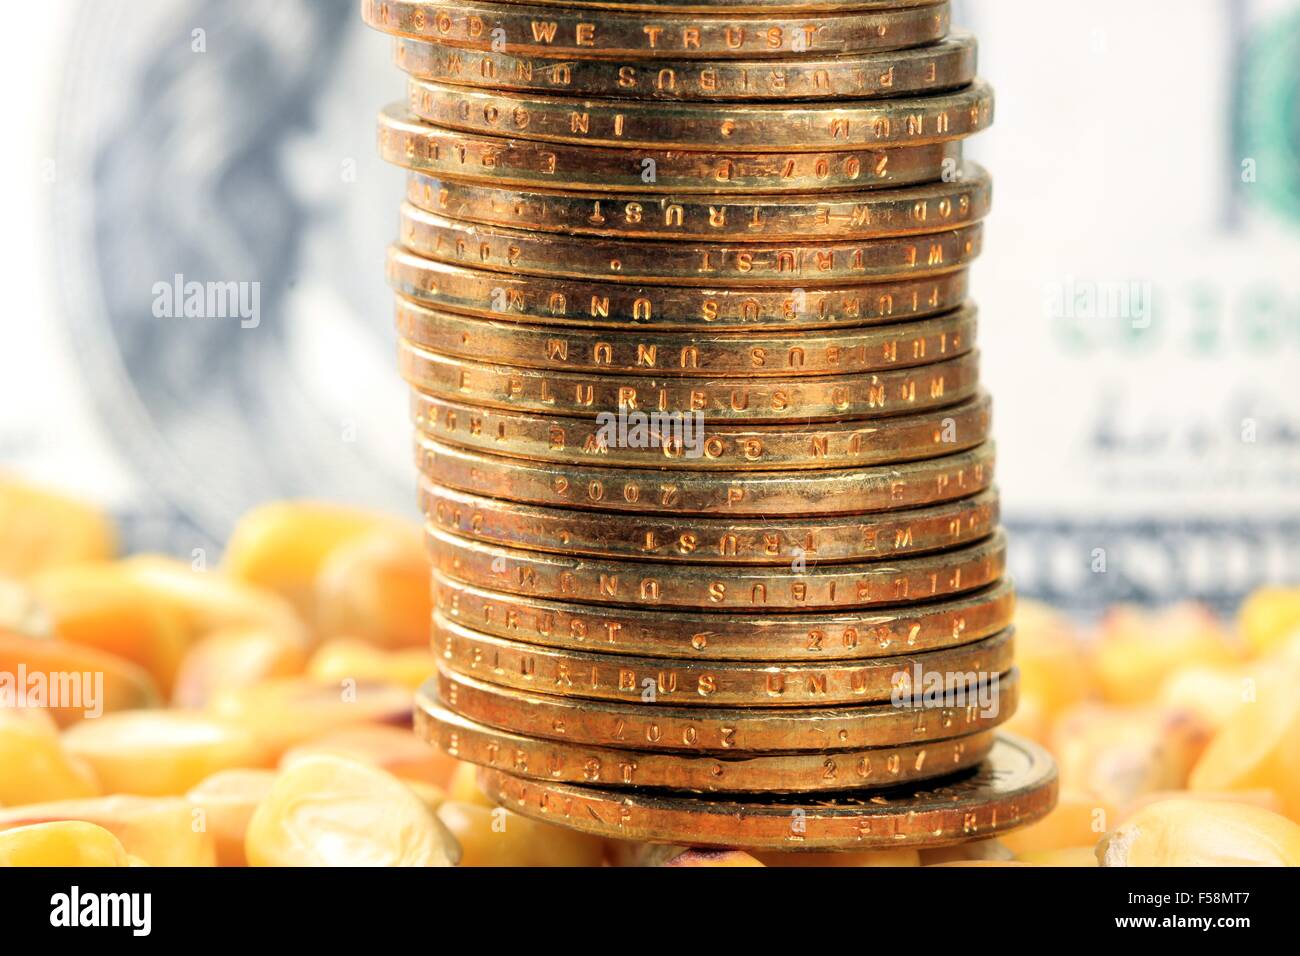 US Currency with Yellow Corn - Commodity Trading Concept Stock Photo